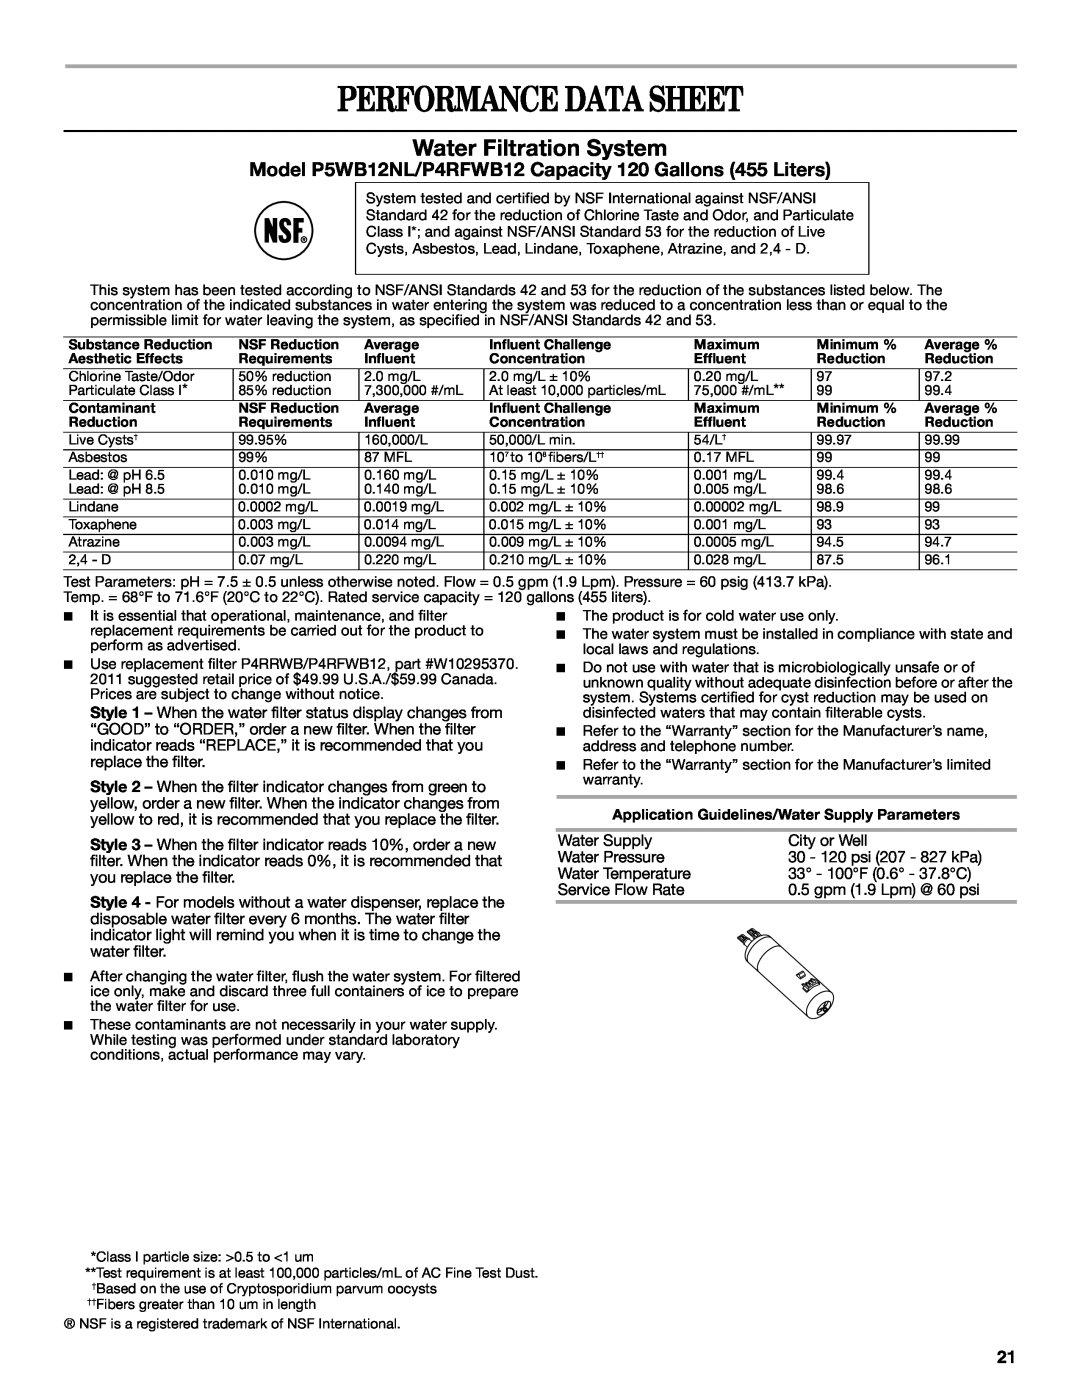 Whirlpool W10359303A installation instructions Performance Data Sheet, Water Filtration System 